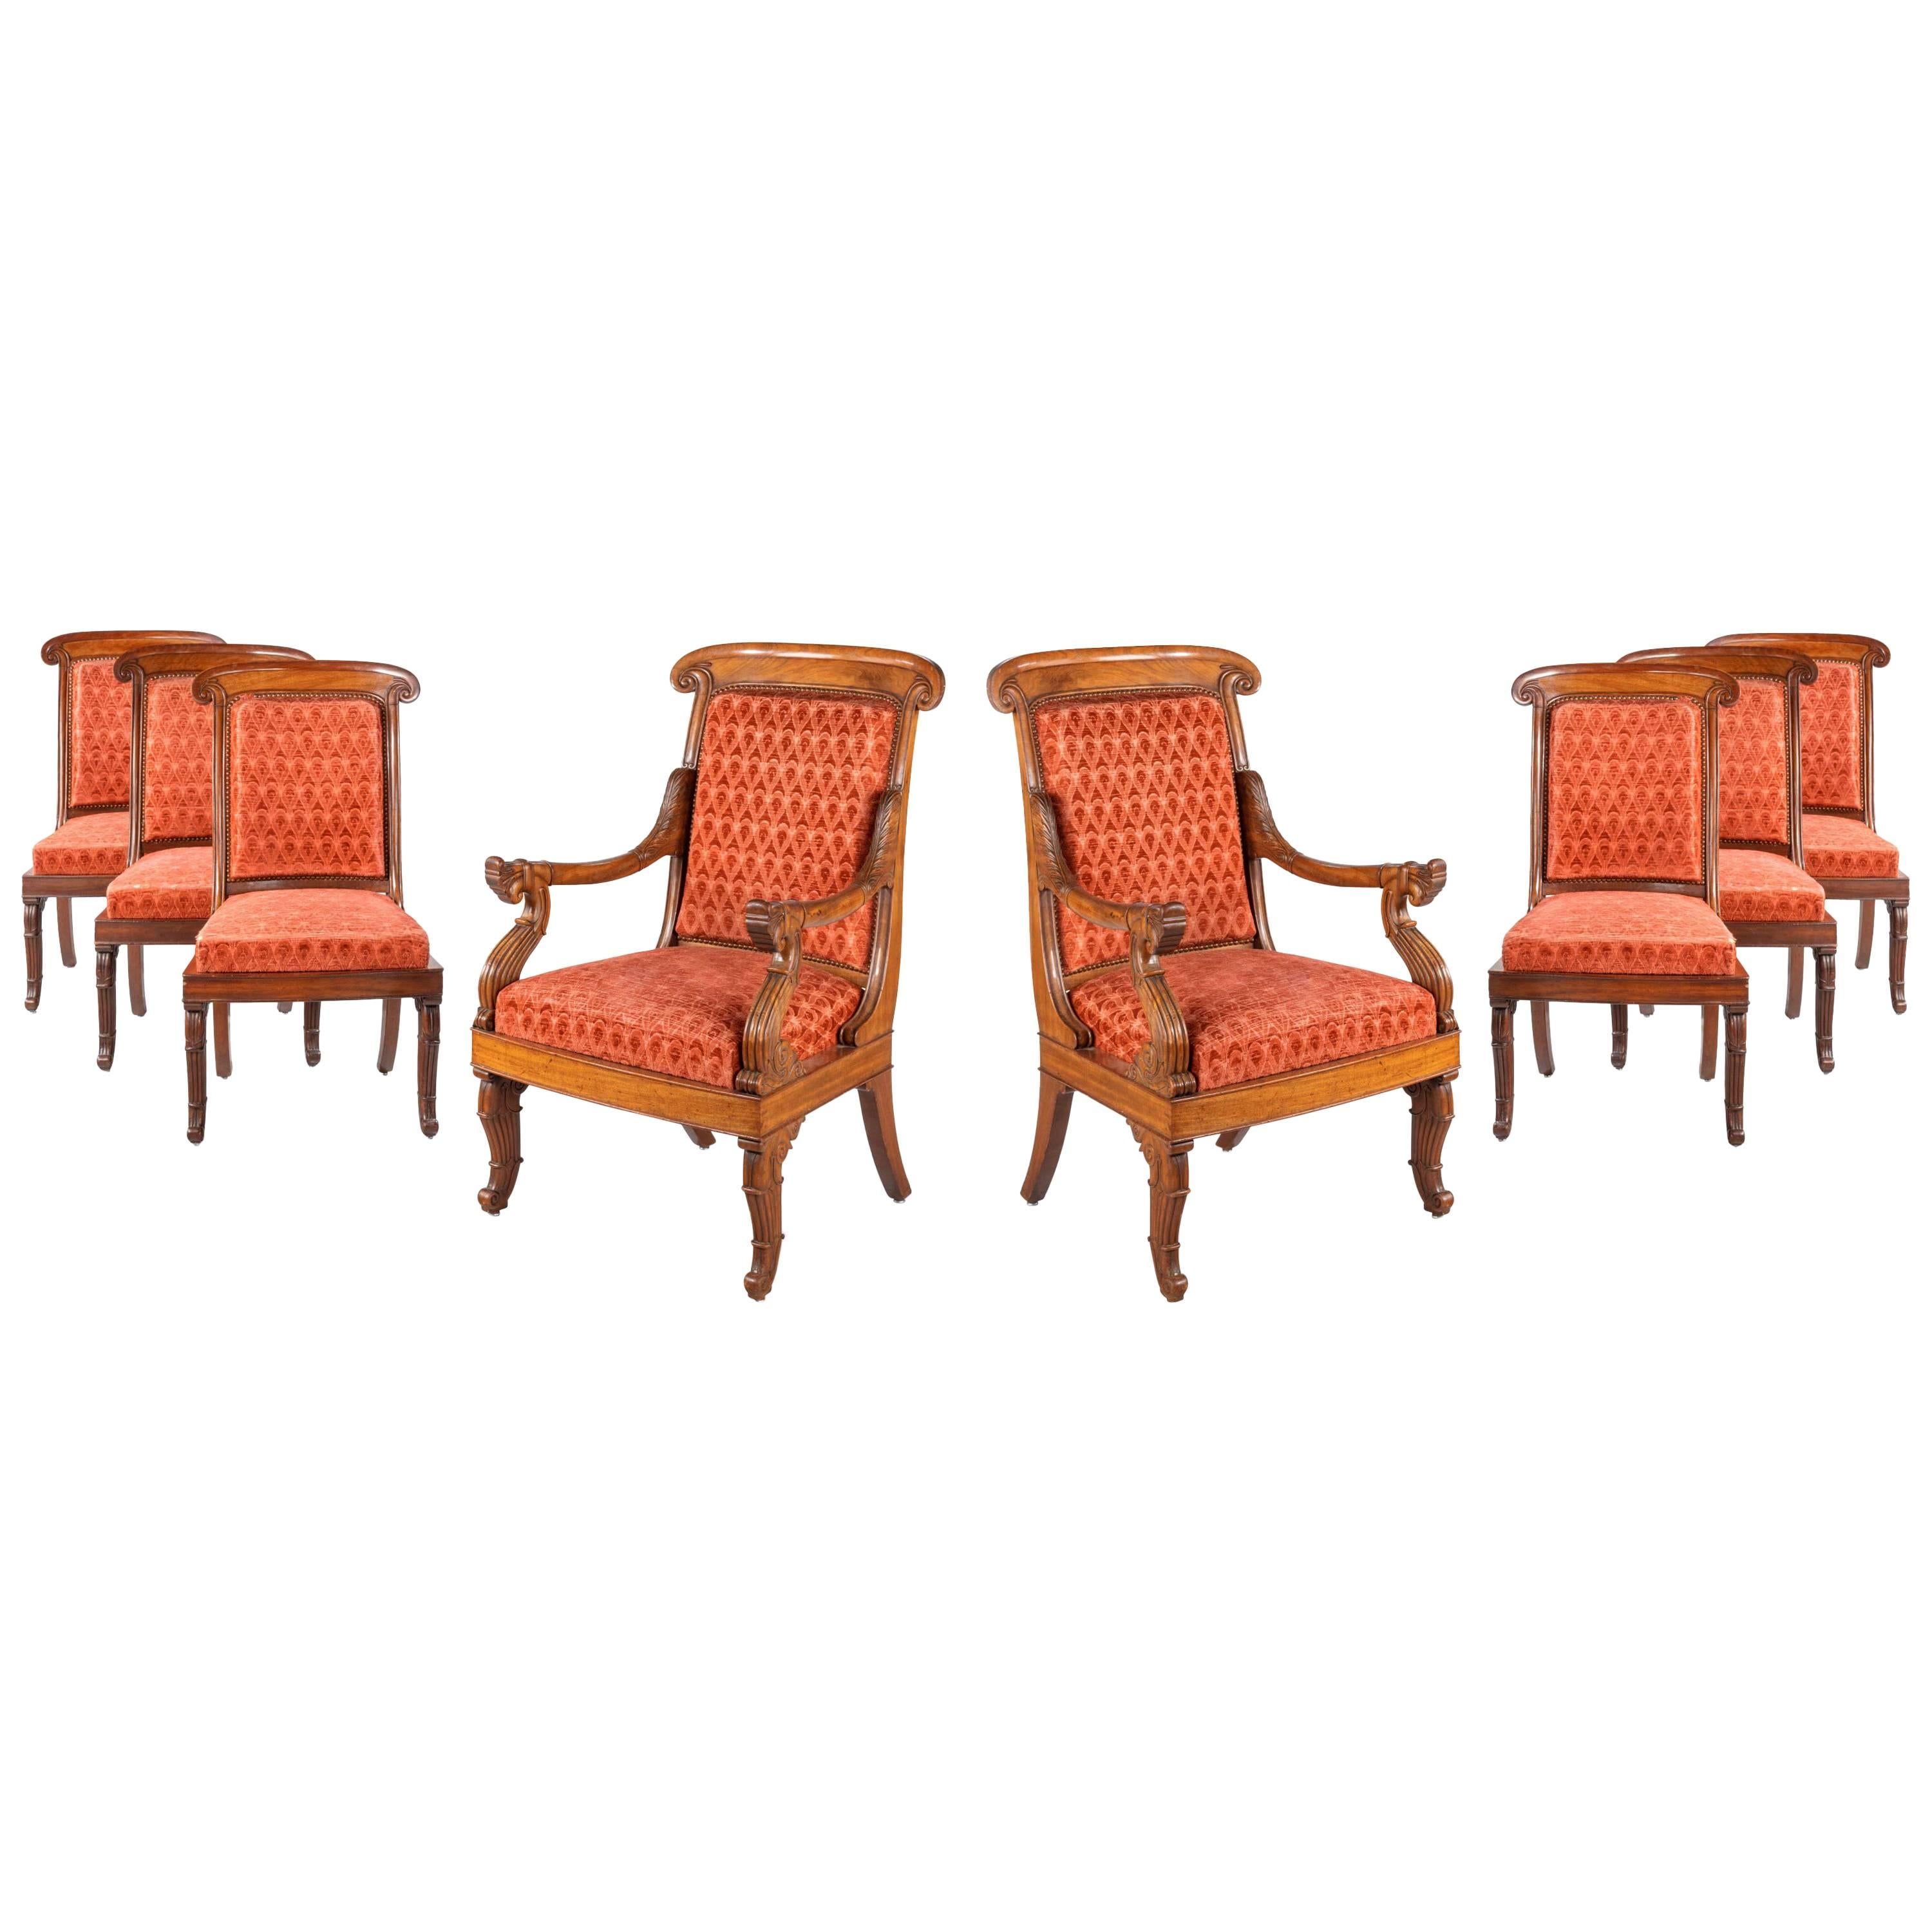 Fine Set of Eight William IV Period Chairs